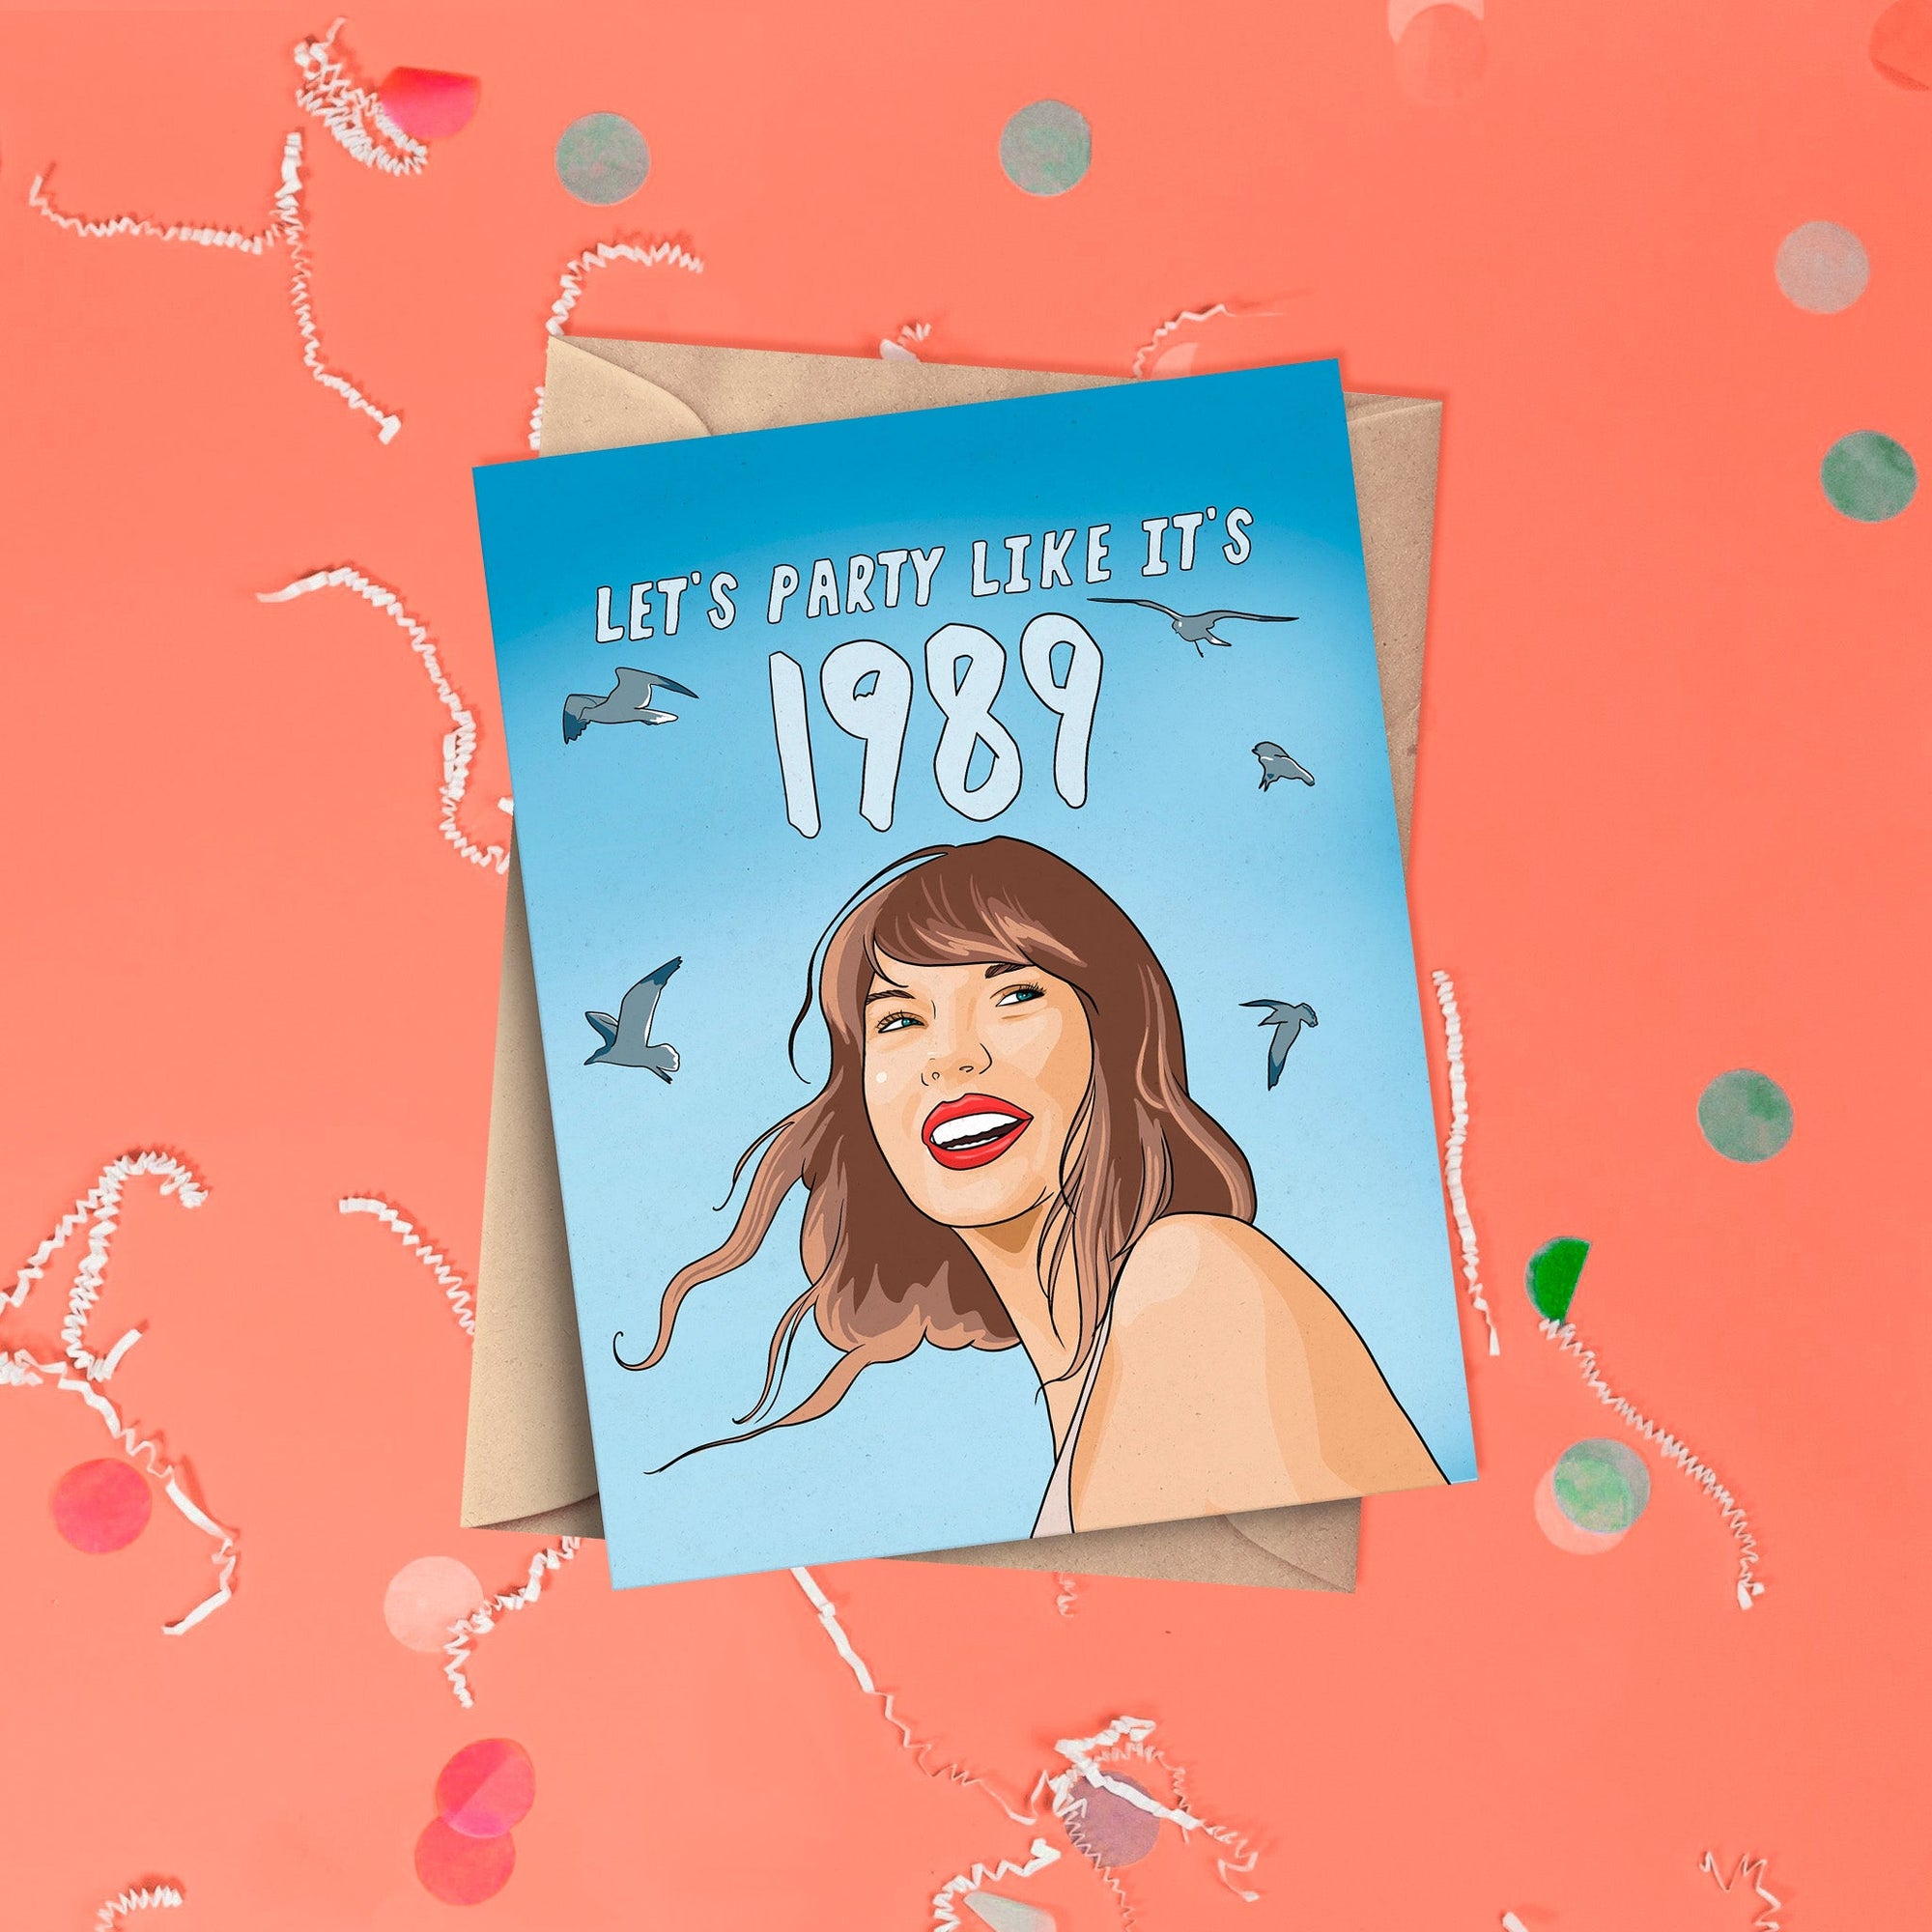 On a coral pink background sits a card with white crinkle and big, colorful confetti scattered around. This Taylor Swift inspired card has different shades of blue. There is an illustration of Taylor Swift and seagulls flying and it says "LET'S PARTY LIKE IT'S 1989" in white lettering. It has a kraft envelope.